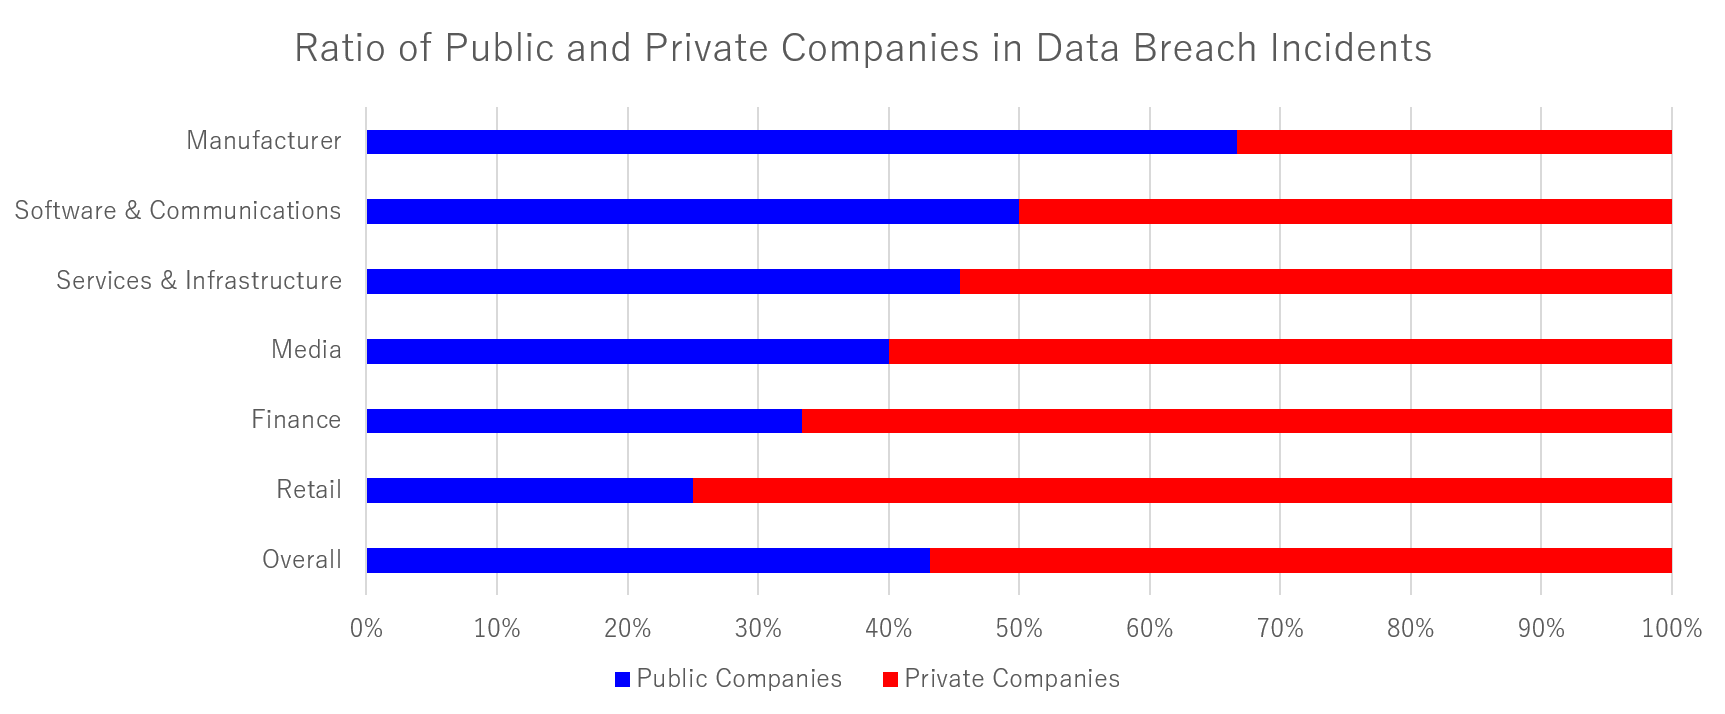 Ratio of Public Companies and Private Companies in Data Breach incidents